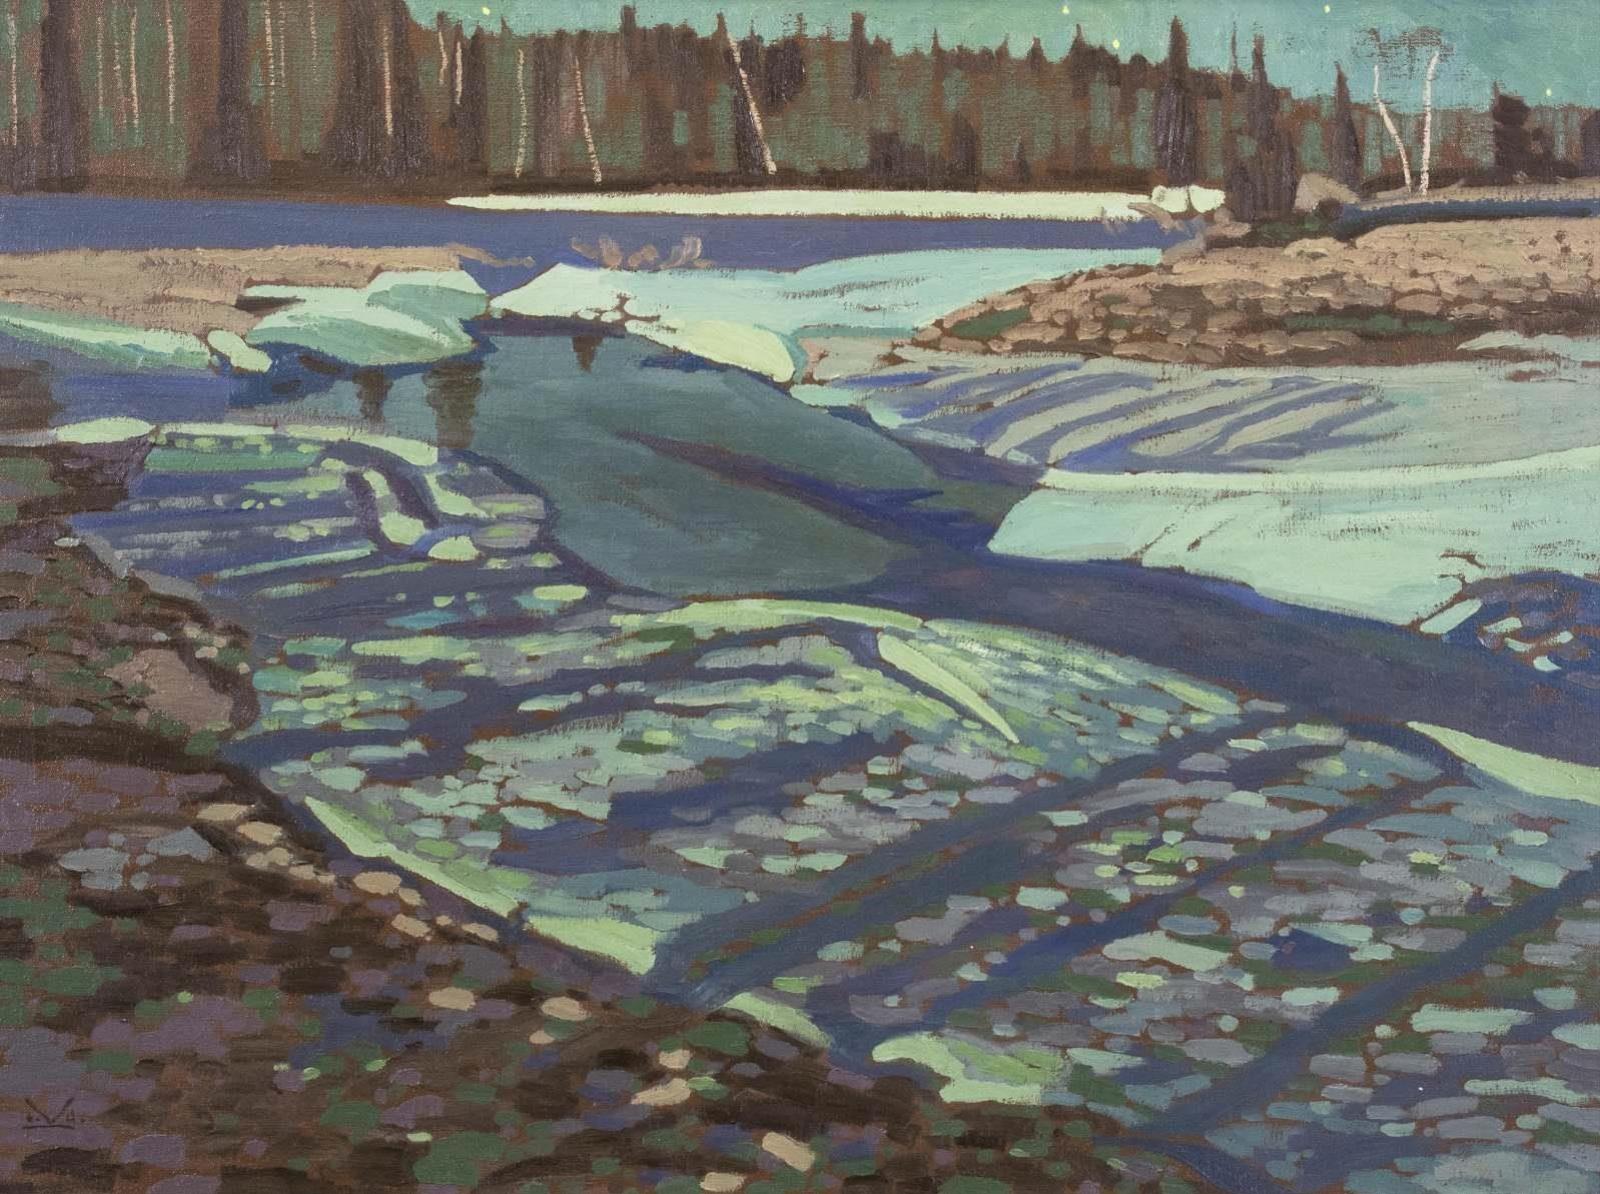 Illingworth Holey (Buck) Kerr (1905-1989) - Channel Ice, Elbow River Forest Reserve; 1983